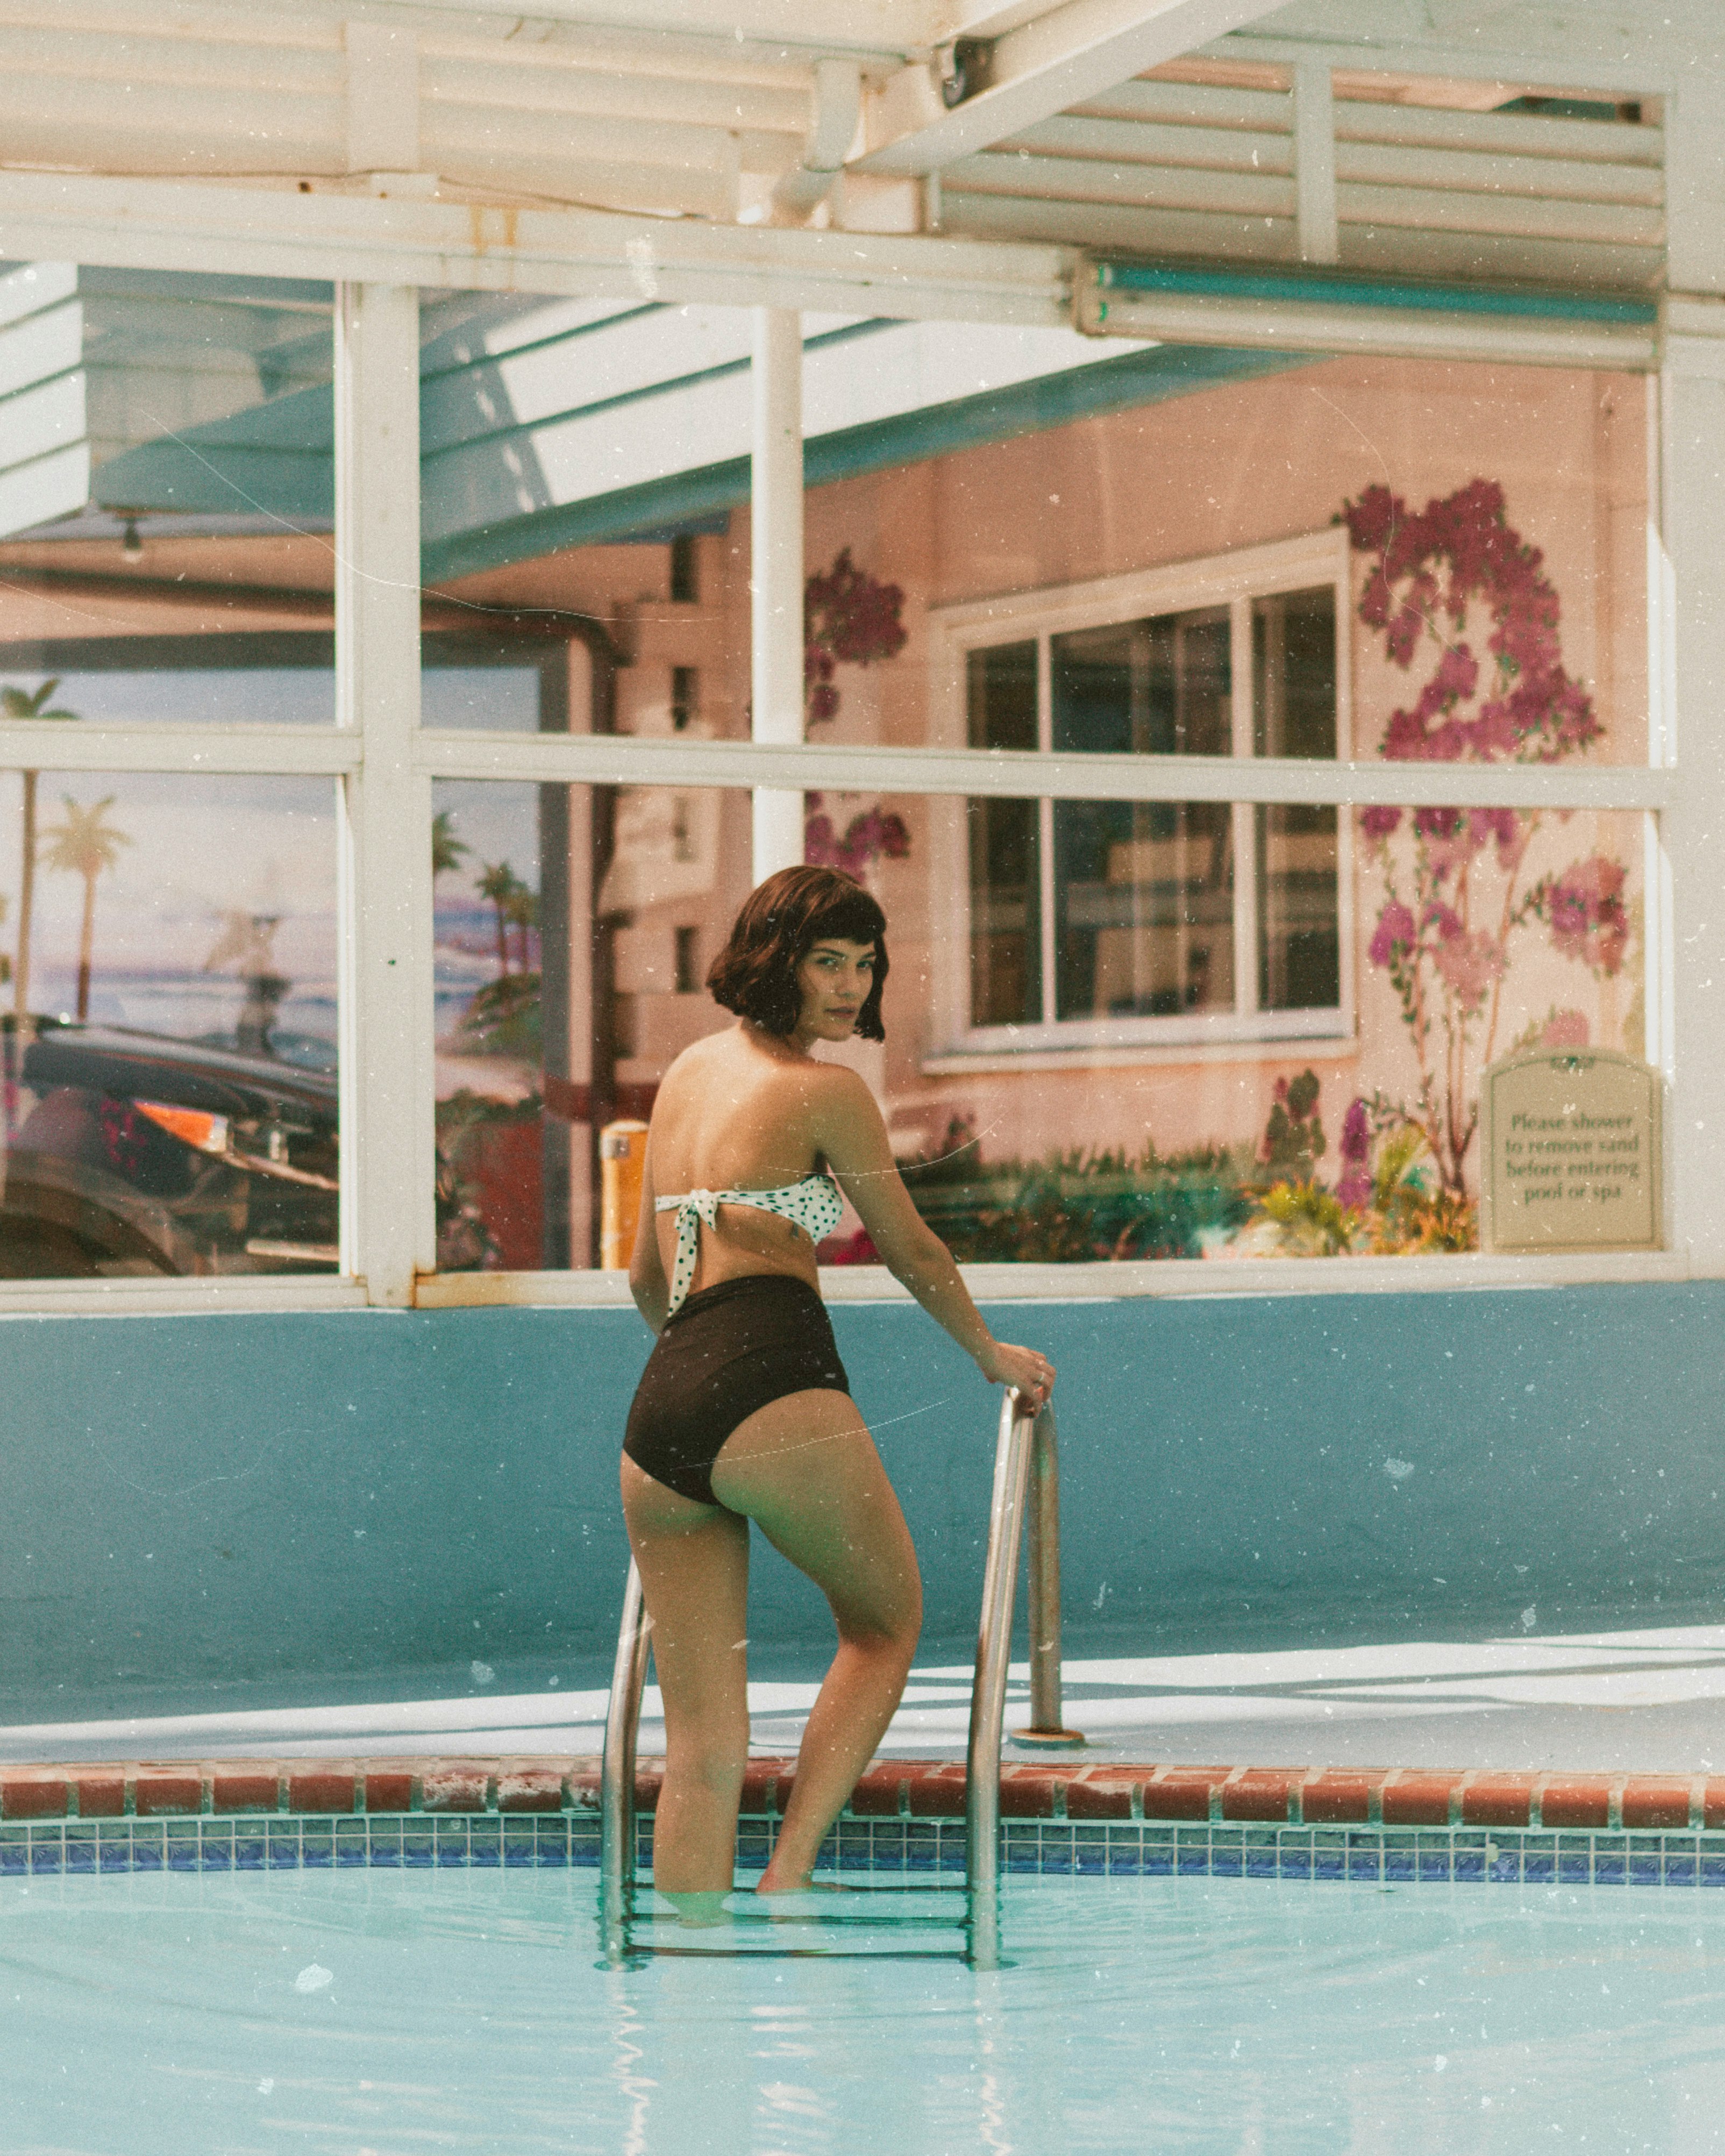 woman standing on pool ladder at daytime